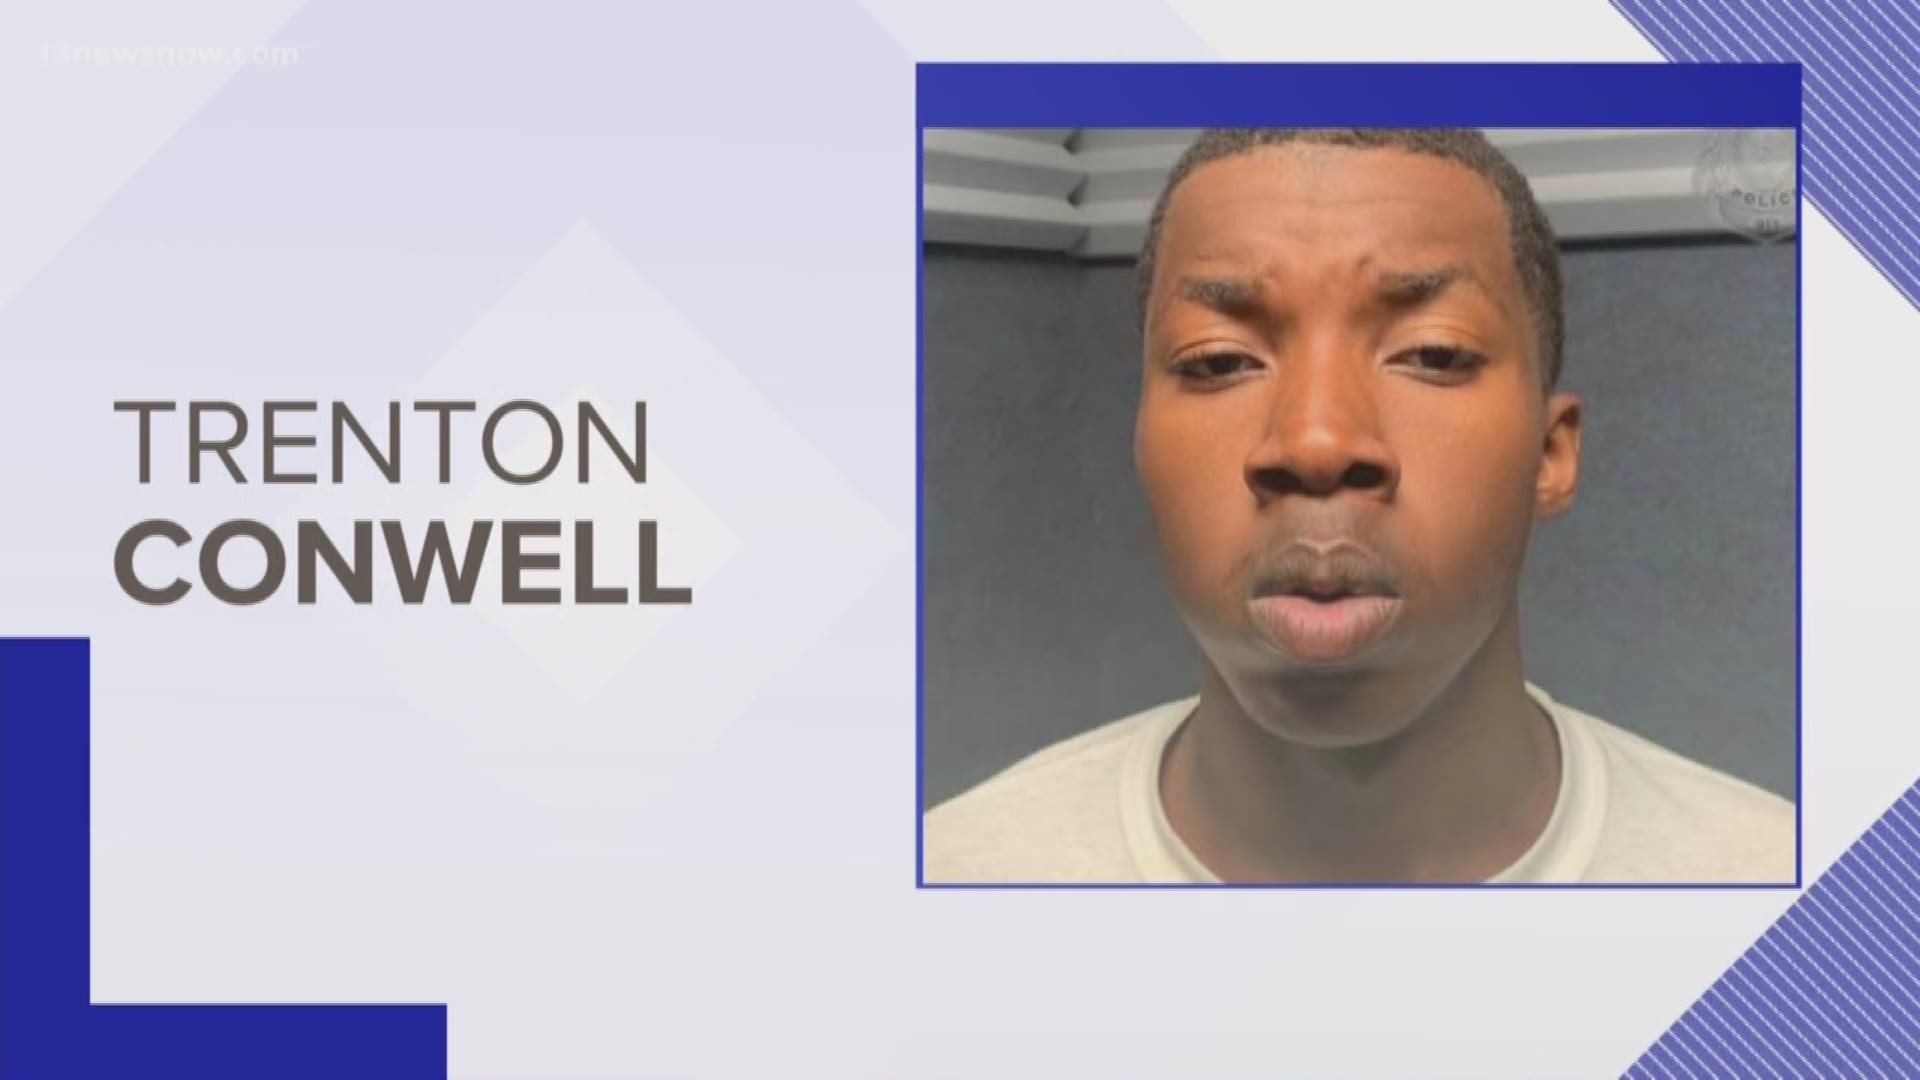 Trenton Conwell is facing multiple charges related to the shooting death of 13-year-old JayDon Davis. The 13-year-old was shot on Mother's Day and died from the injuries Tuesday.